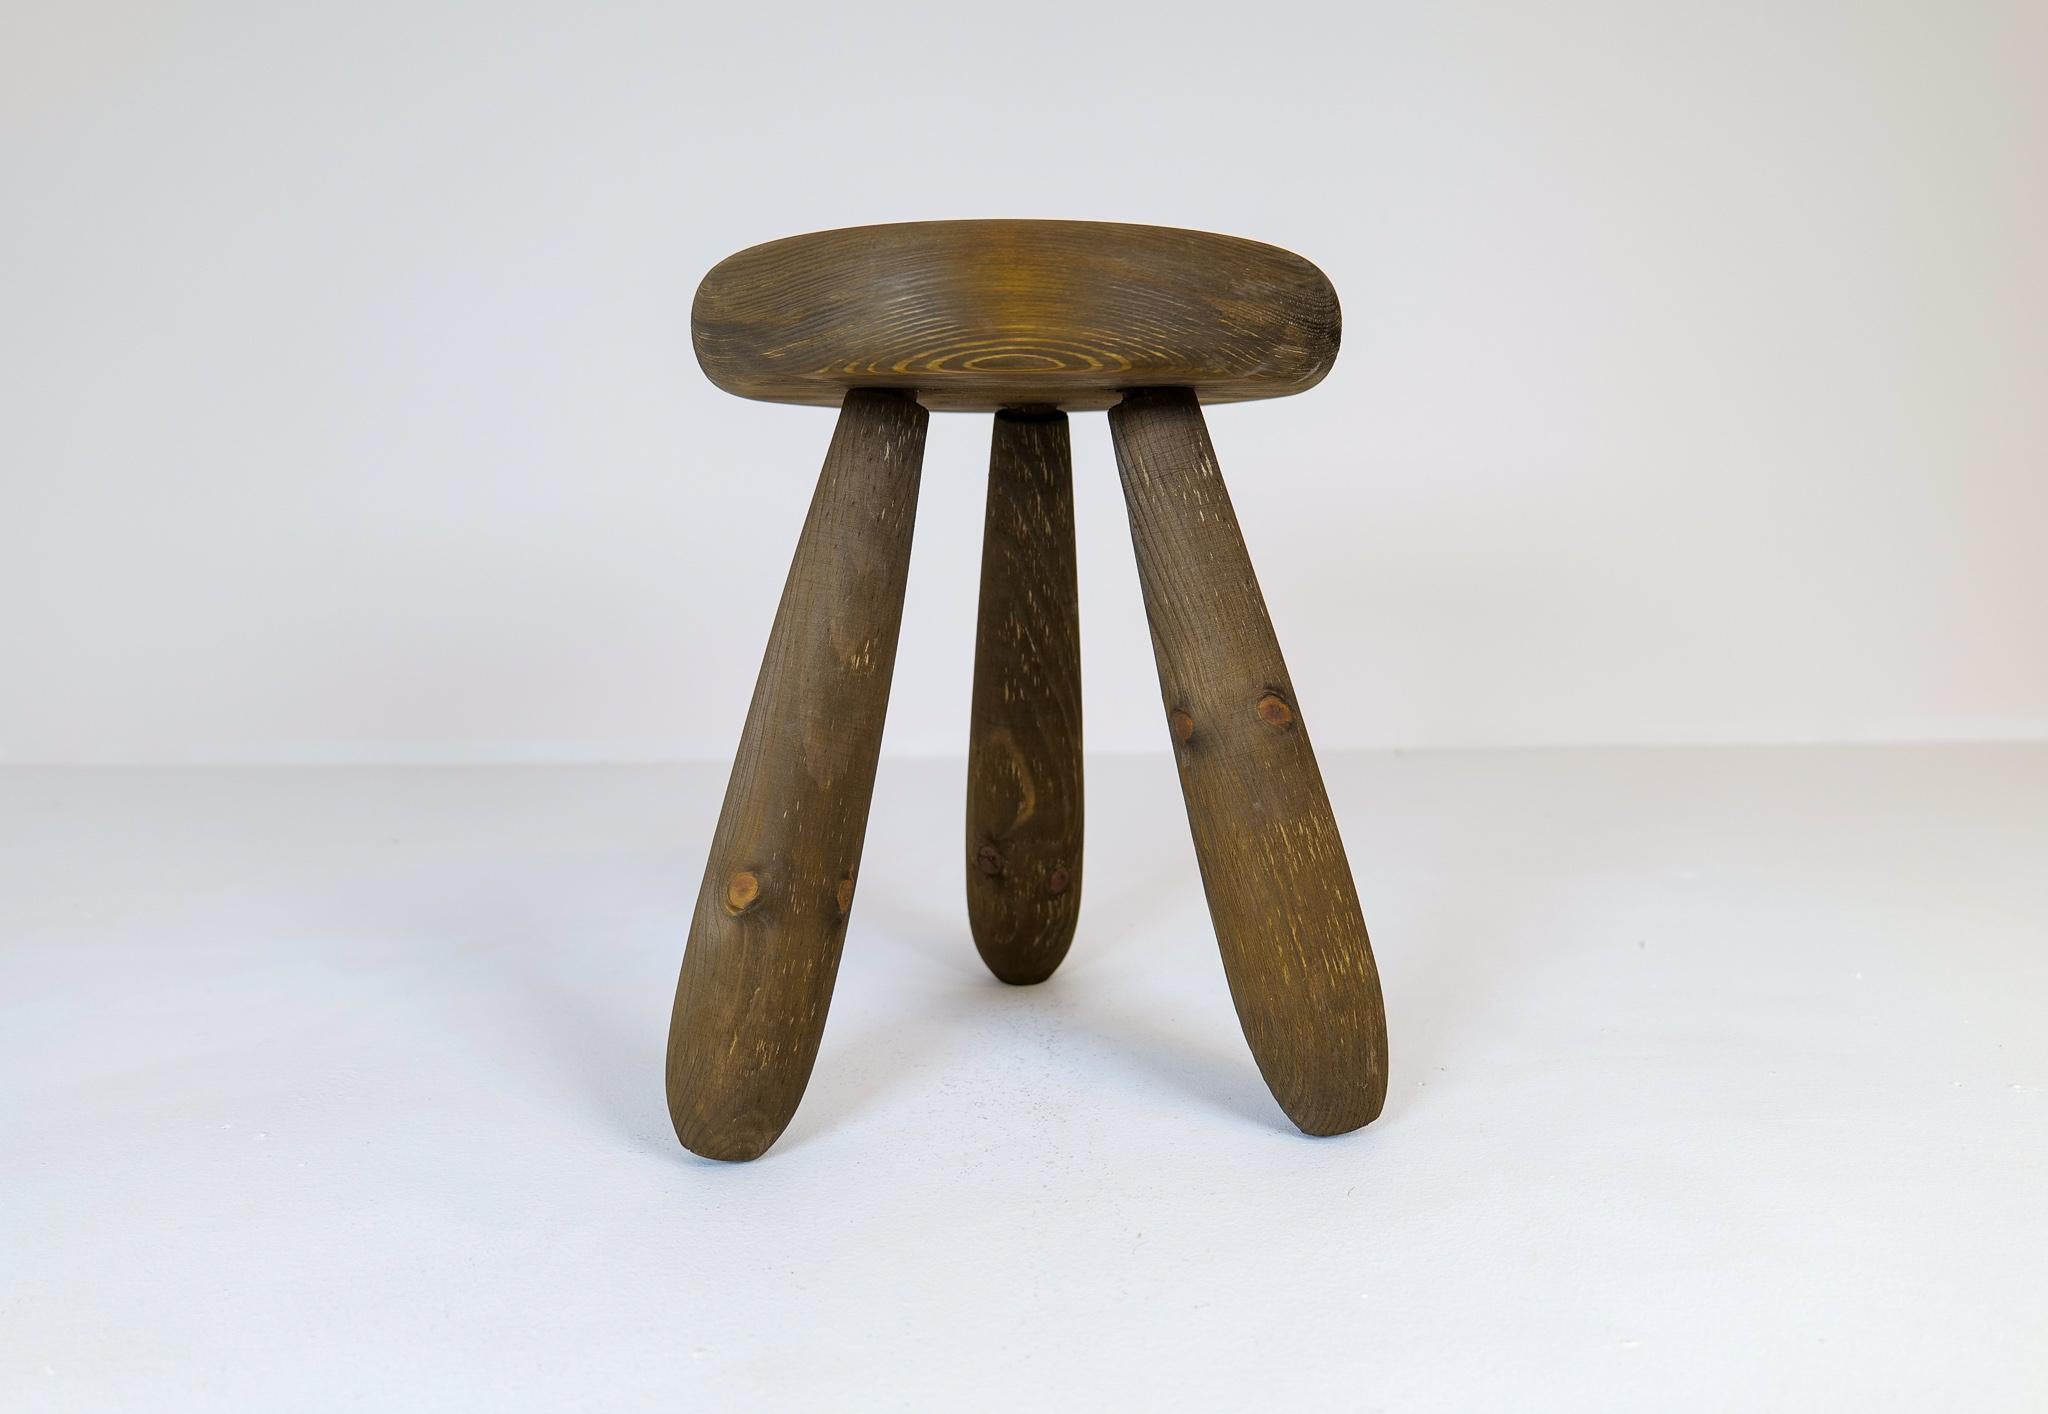 Swedish Sculptural Stool in Stained Pine, Attributed to Ingvar Hildingsson, Sweden, 1970s For Sale